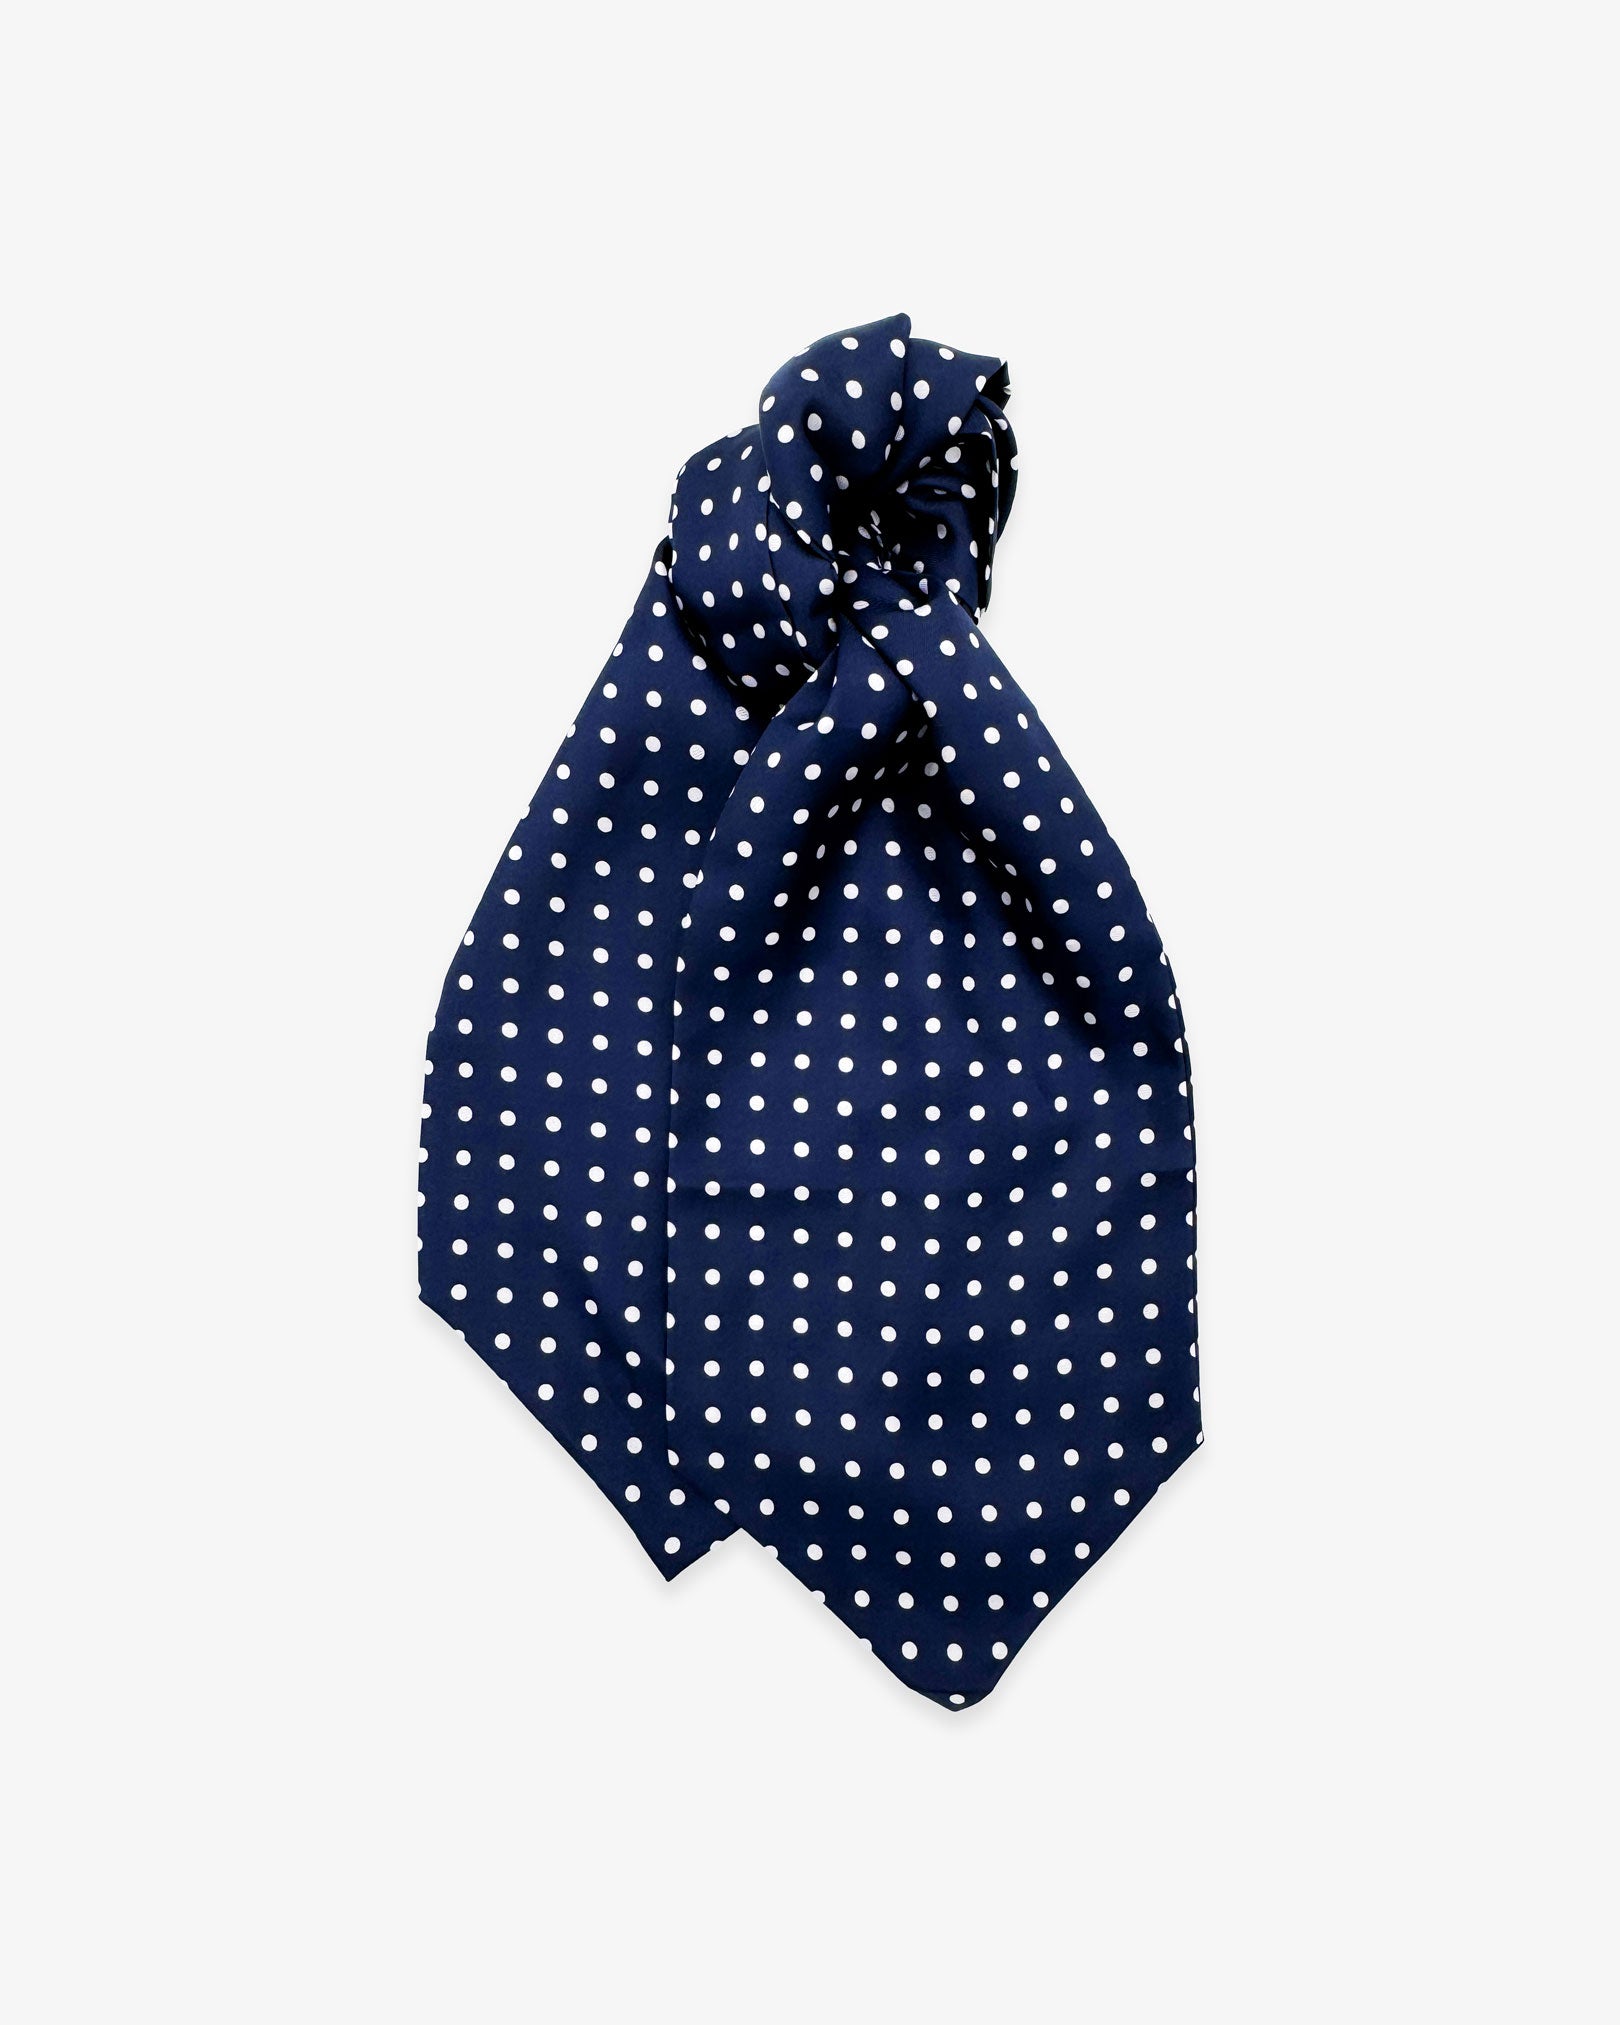 Entire view of 'The Westminster' double Ascot tie with wide ends at the bottom and clear view of the white polka dots on a navy-blue background